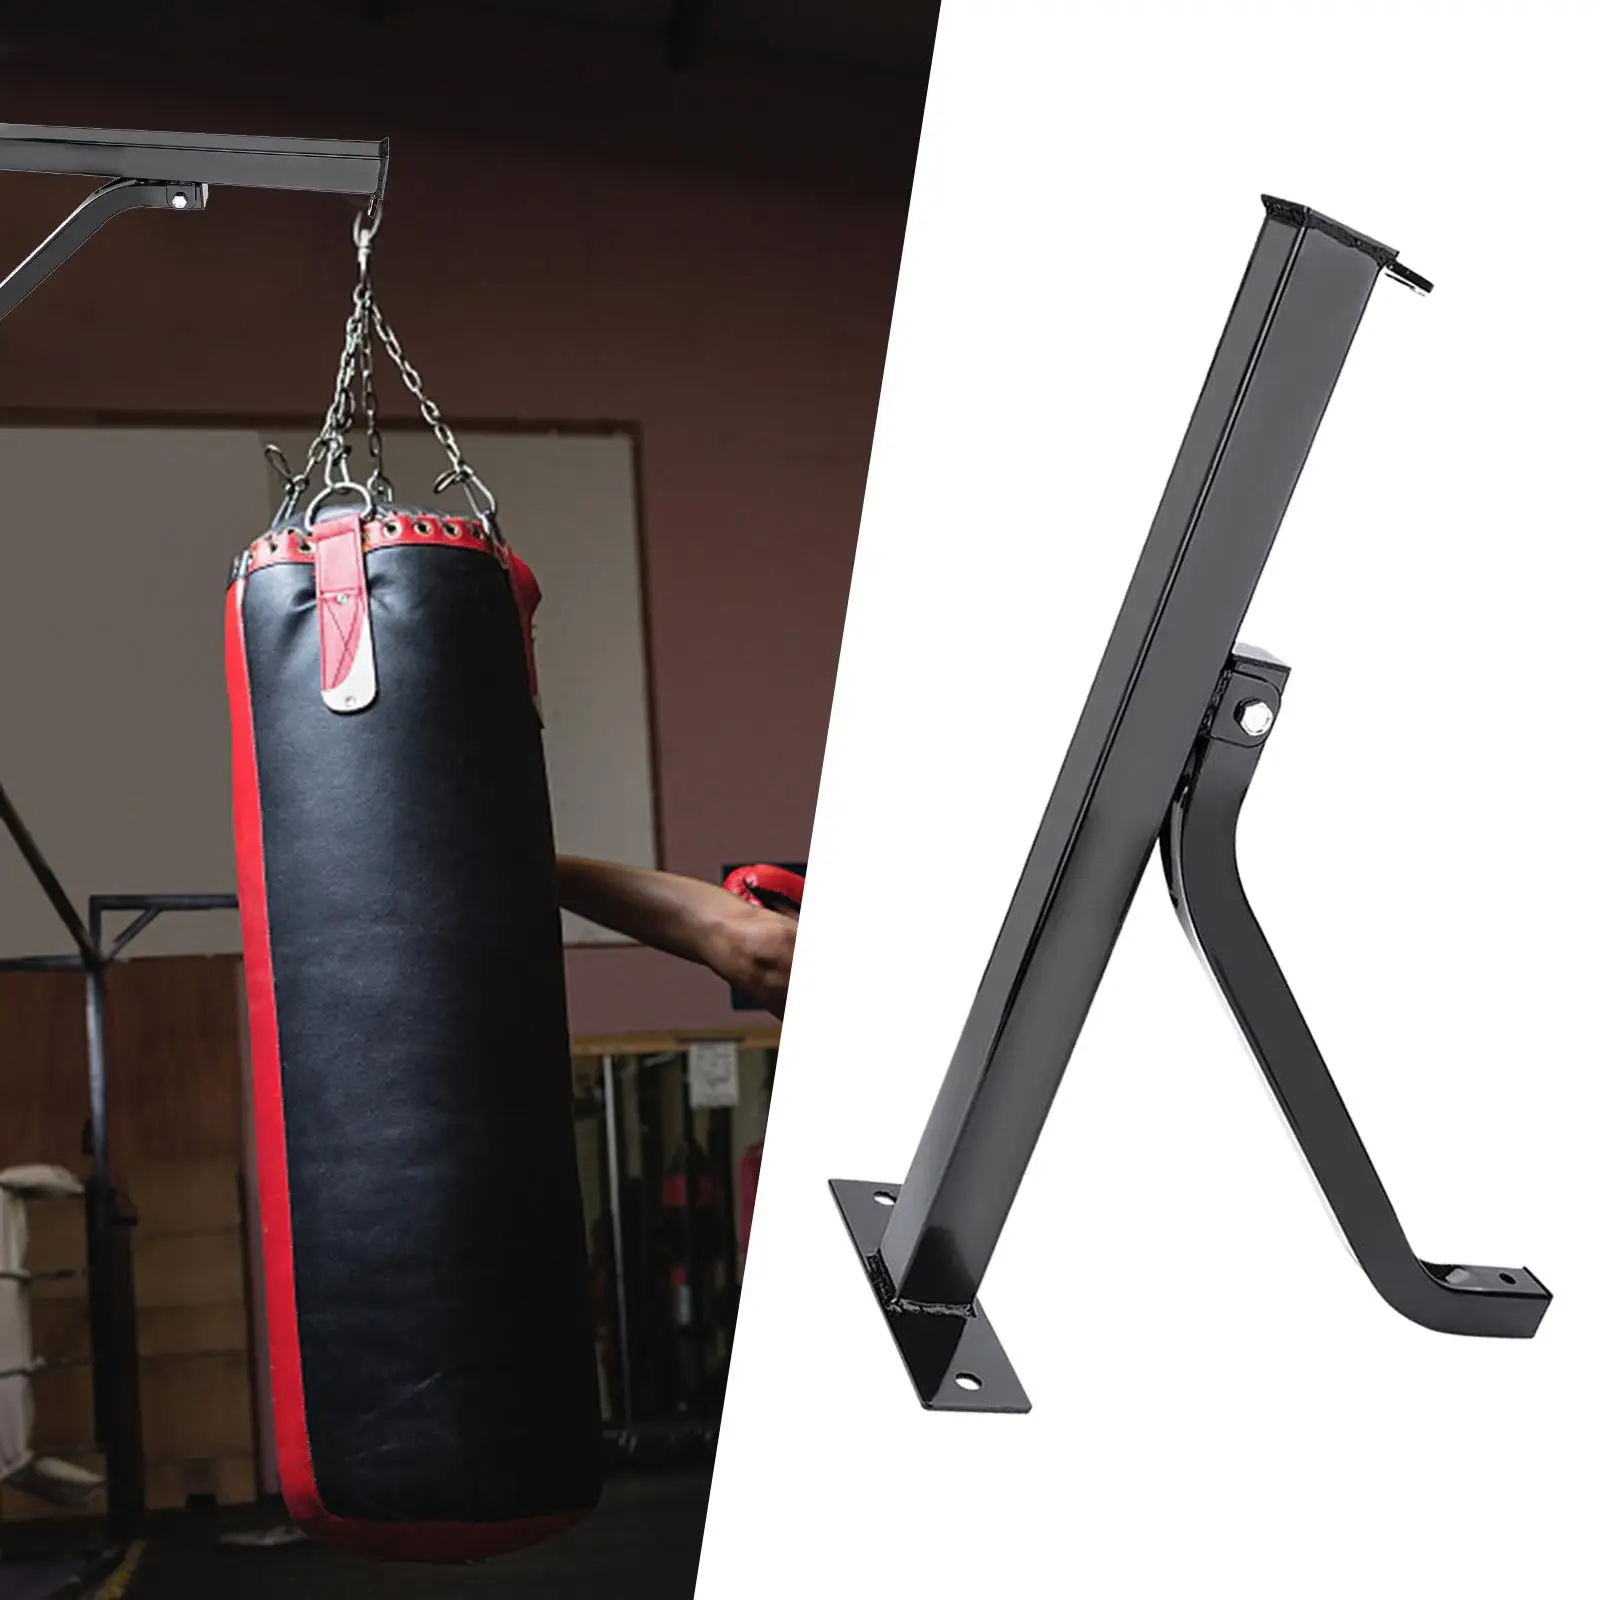 Wall Mount Heavy Bag Hanger Punching Bag Wall Bracket Boxing Bag Stand Training Holder Rack for Fitness Home Gym Mma Accessories